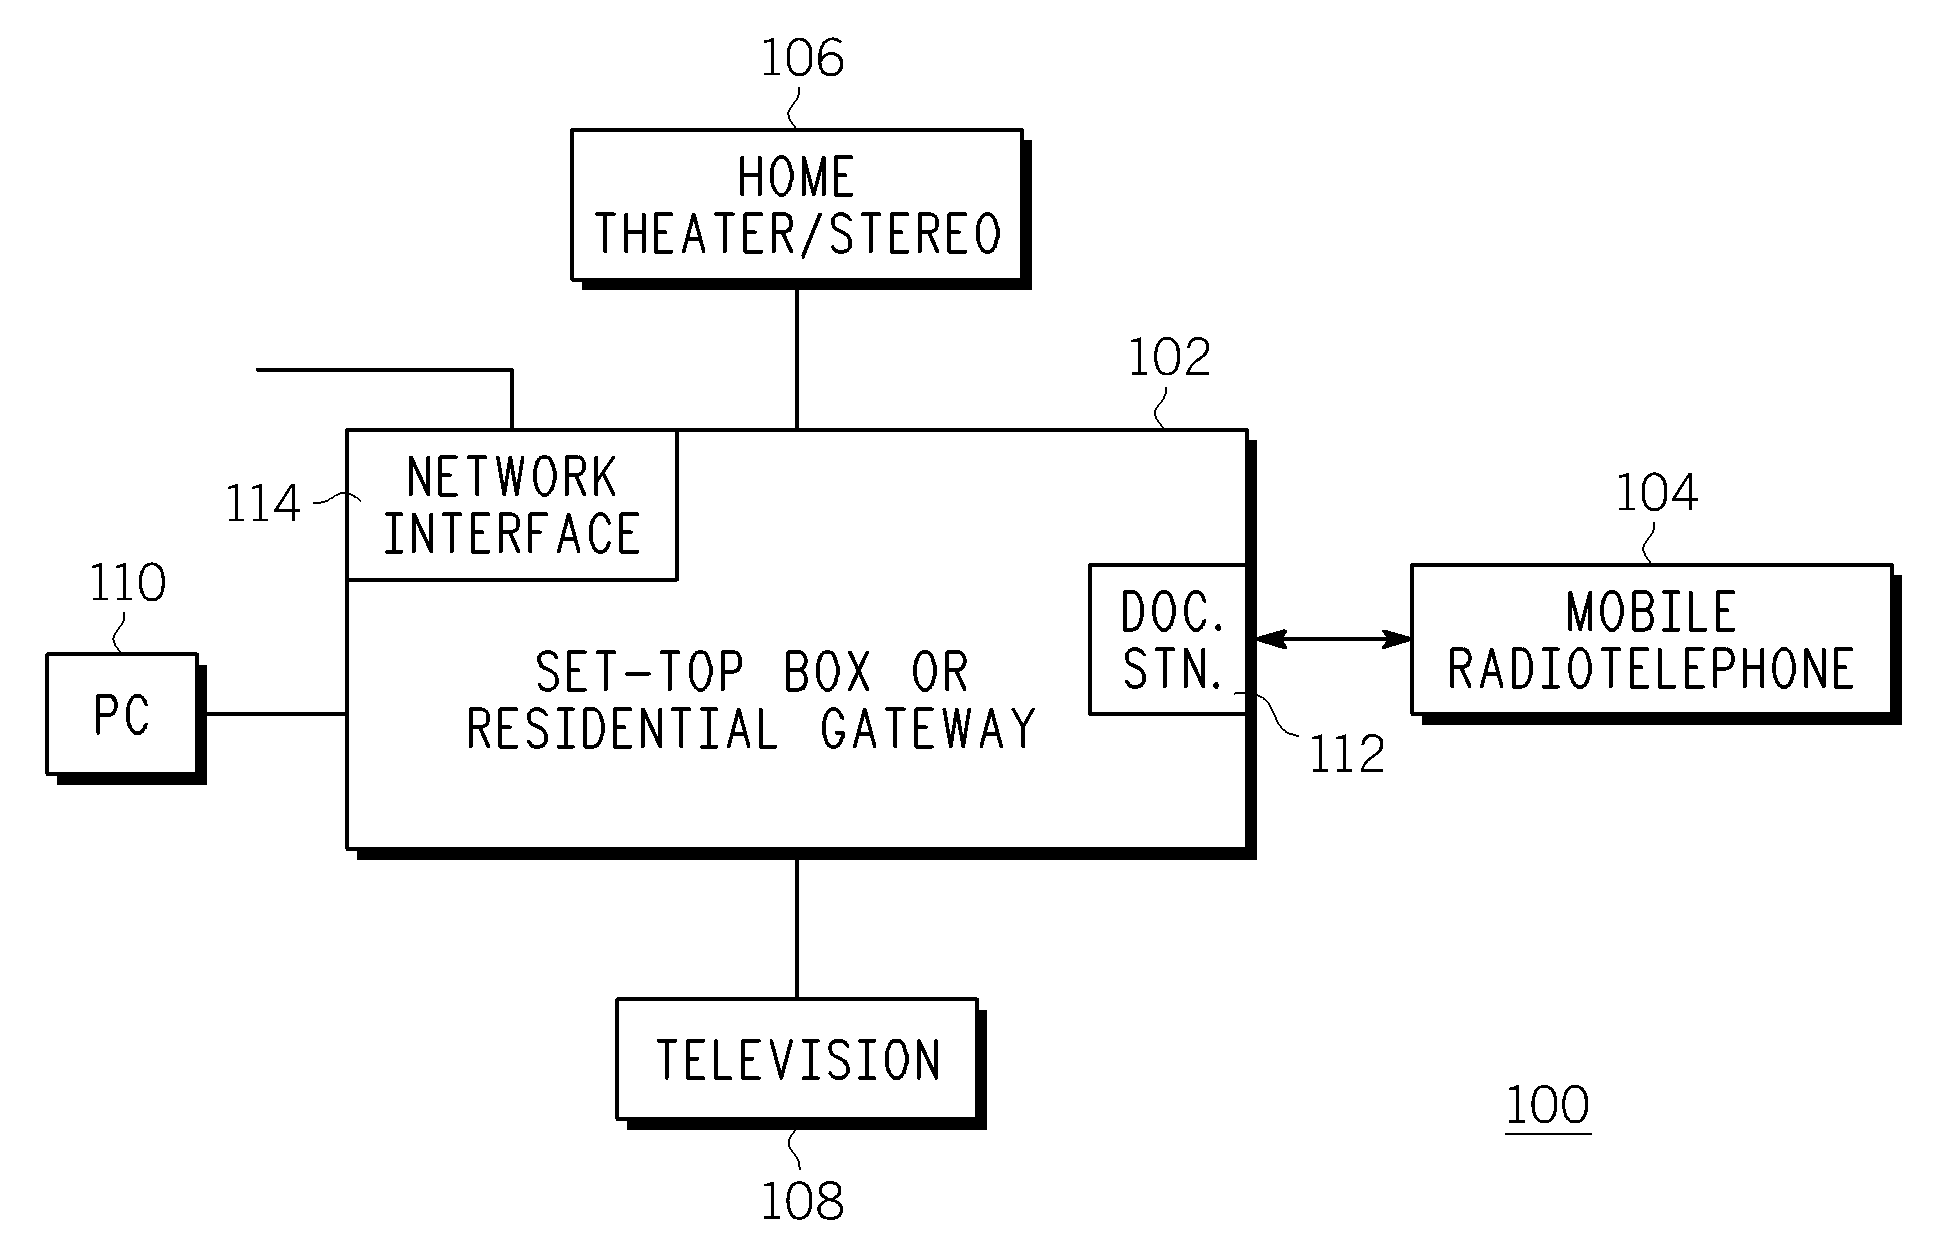 Set-Top Box and Method for Operating the Set-Top Box Using a Mobile Telephone